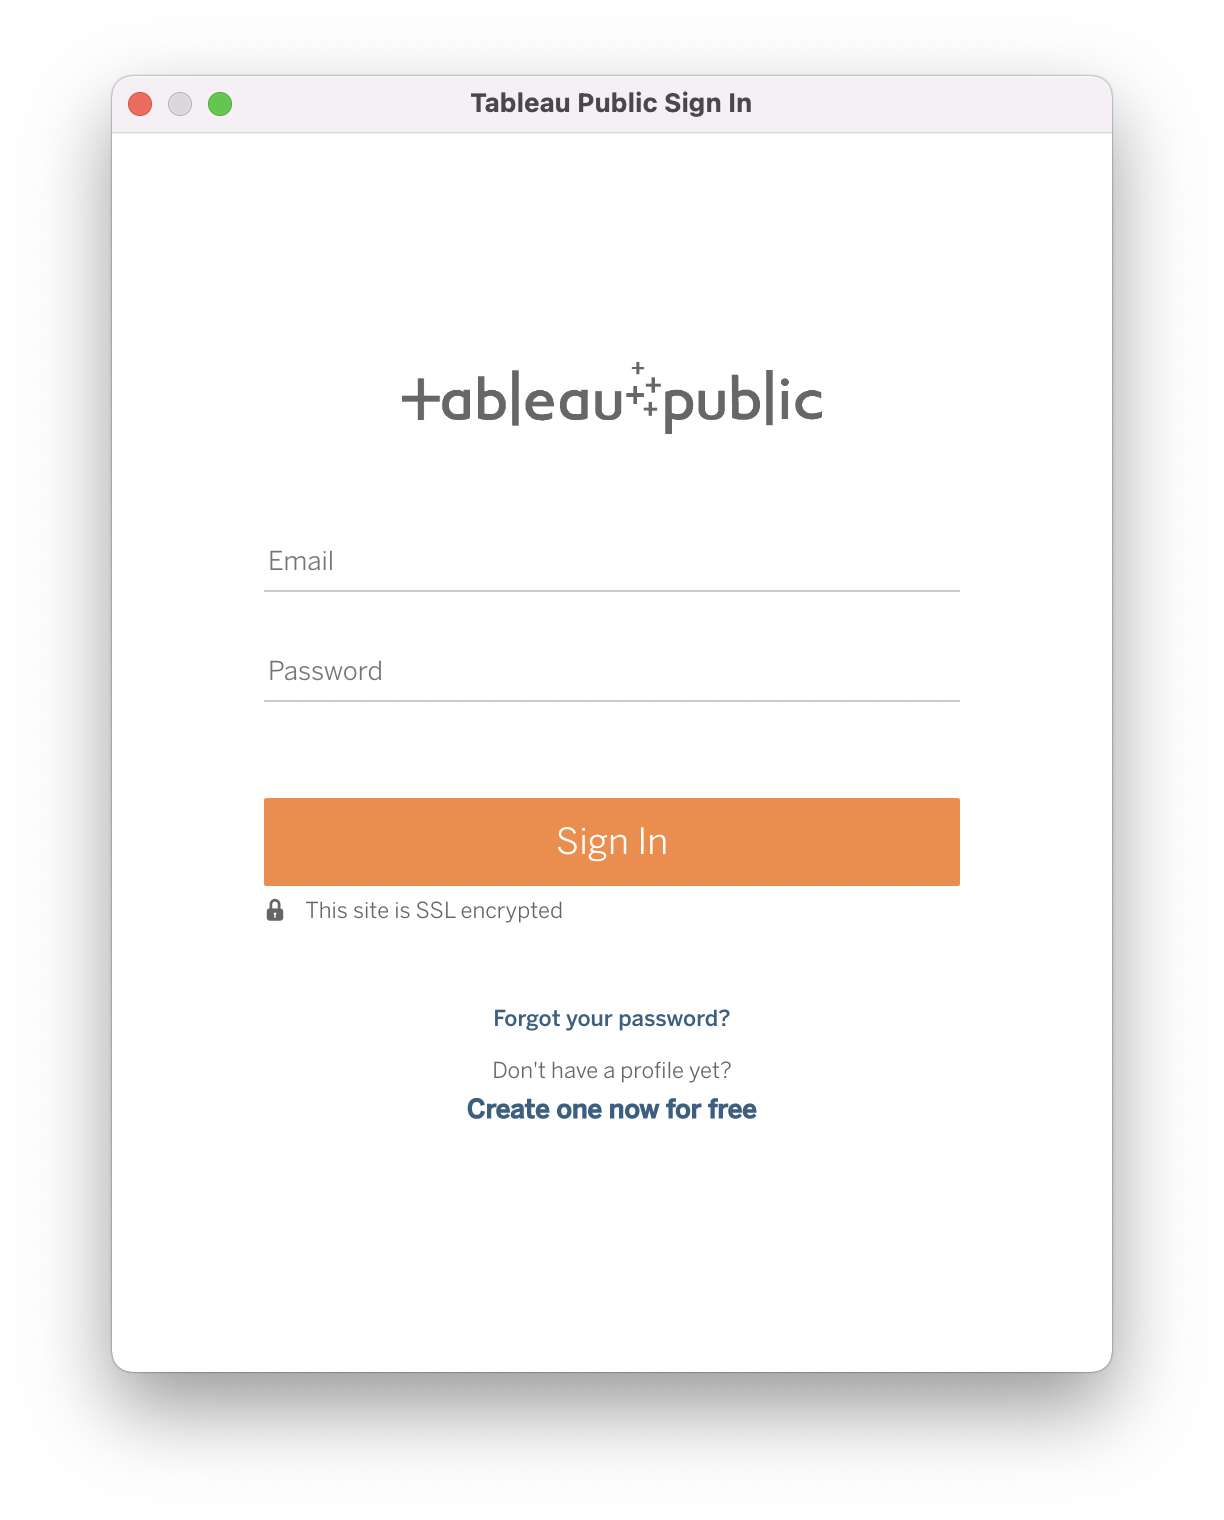 The Tableau Public Sign In dialogue